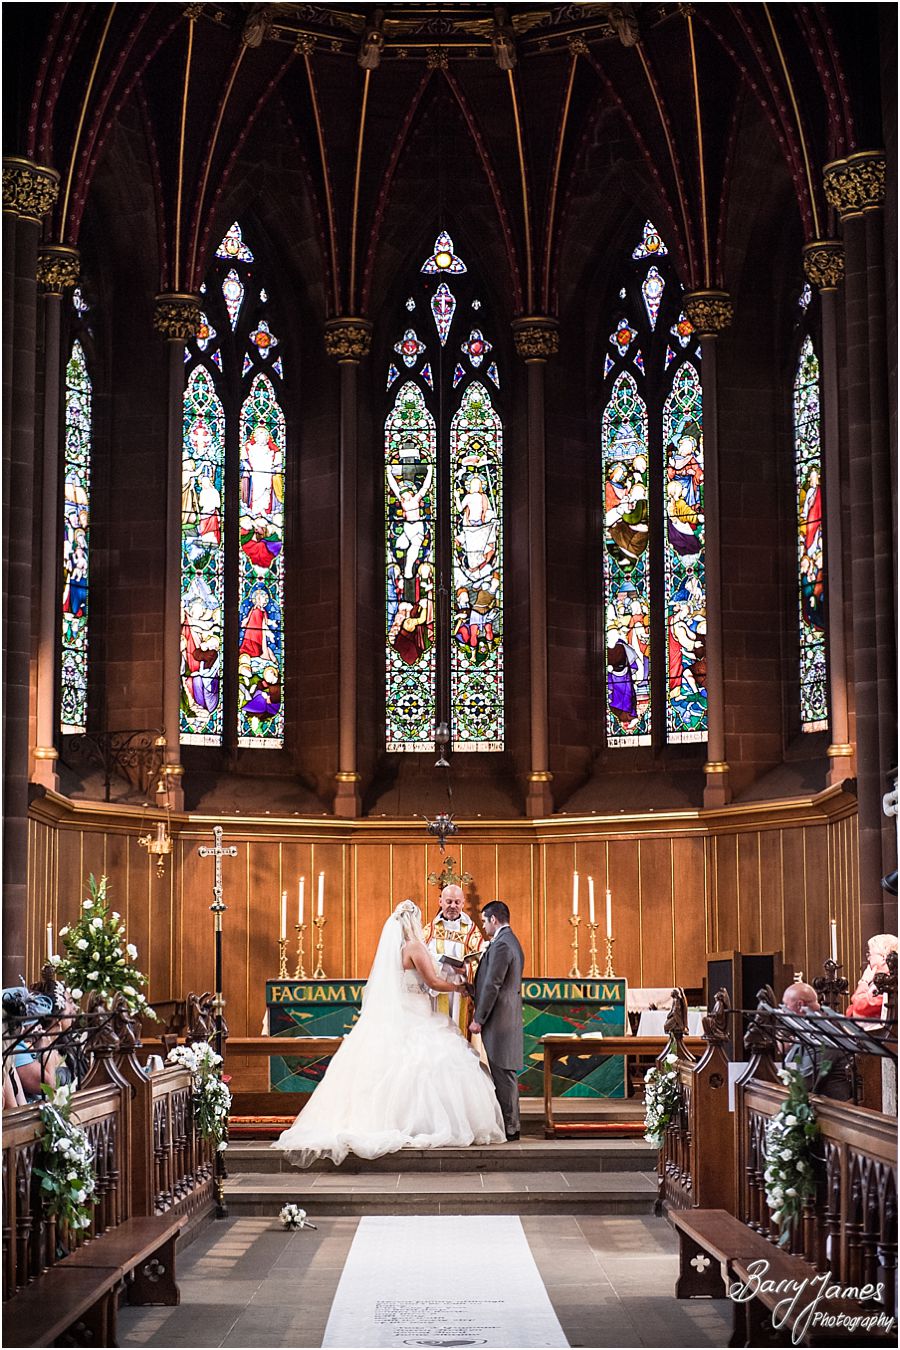 Contemporary and creative wedding photography at the Collegiate Church in Wolverhampton by Wolverhampton Wedding Photographer Barry James